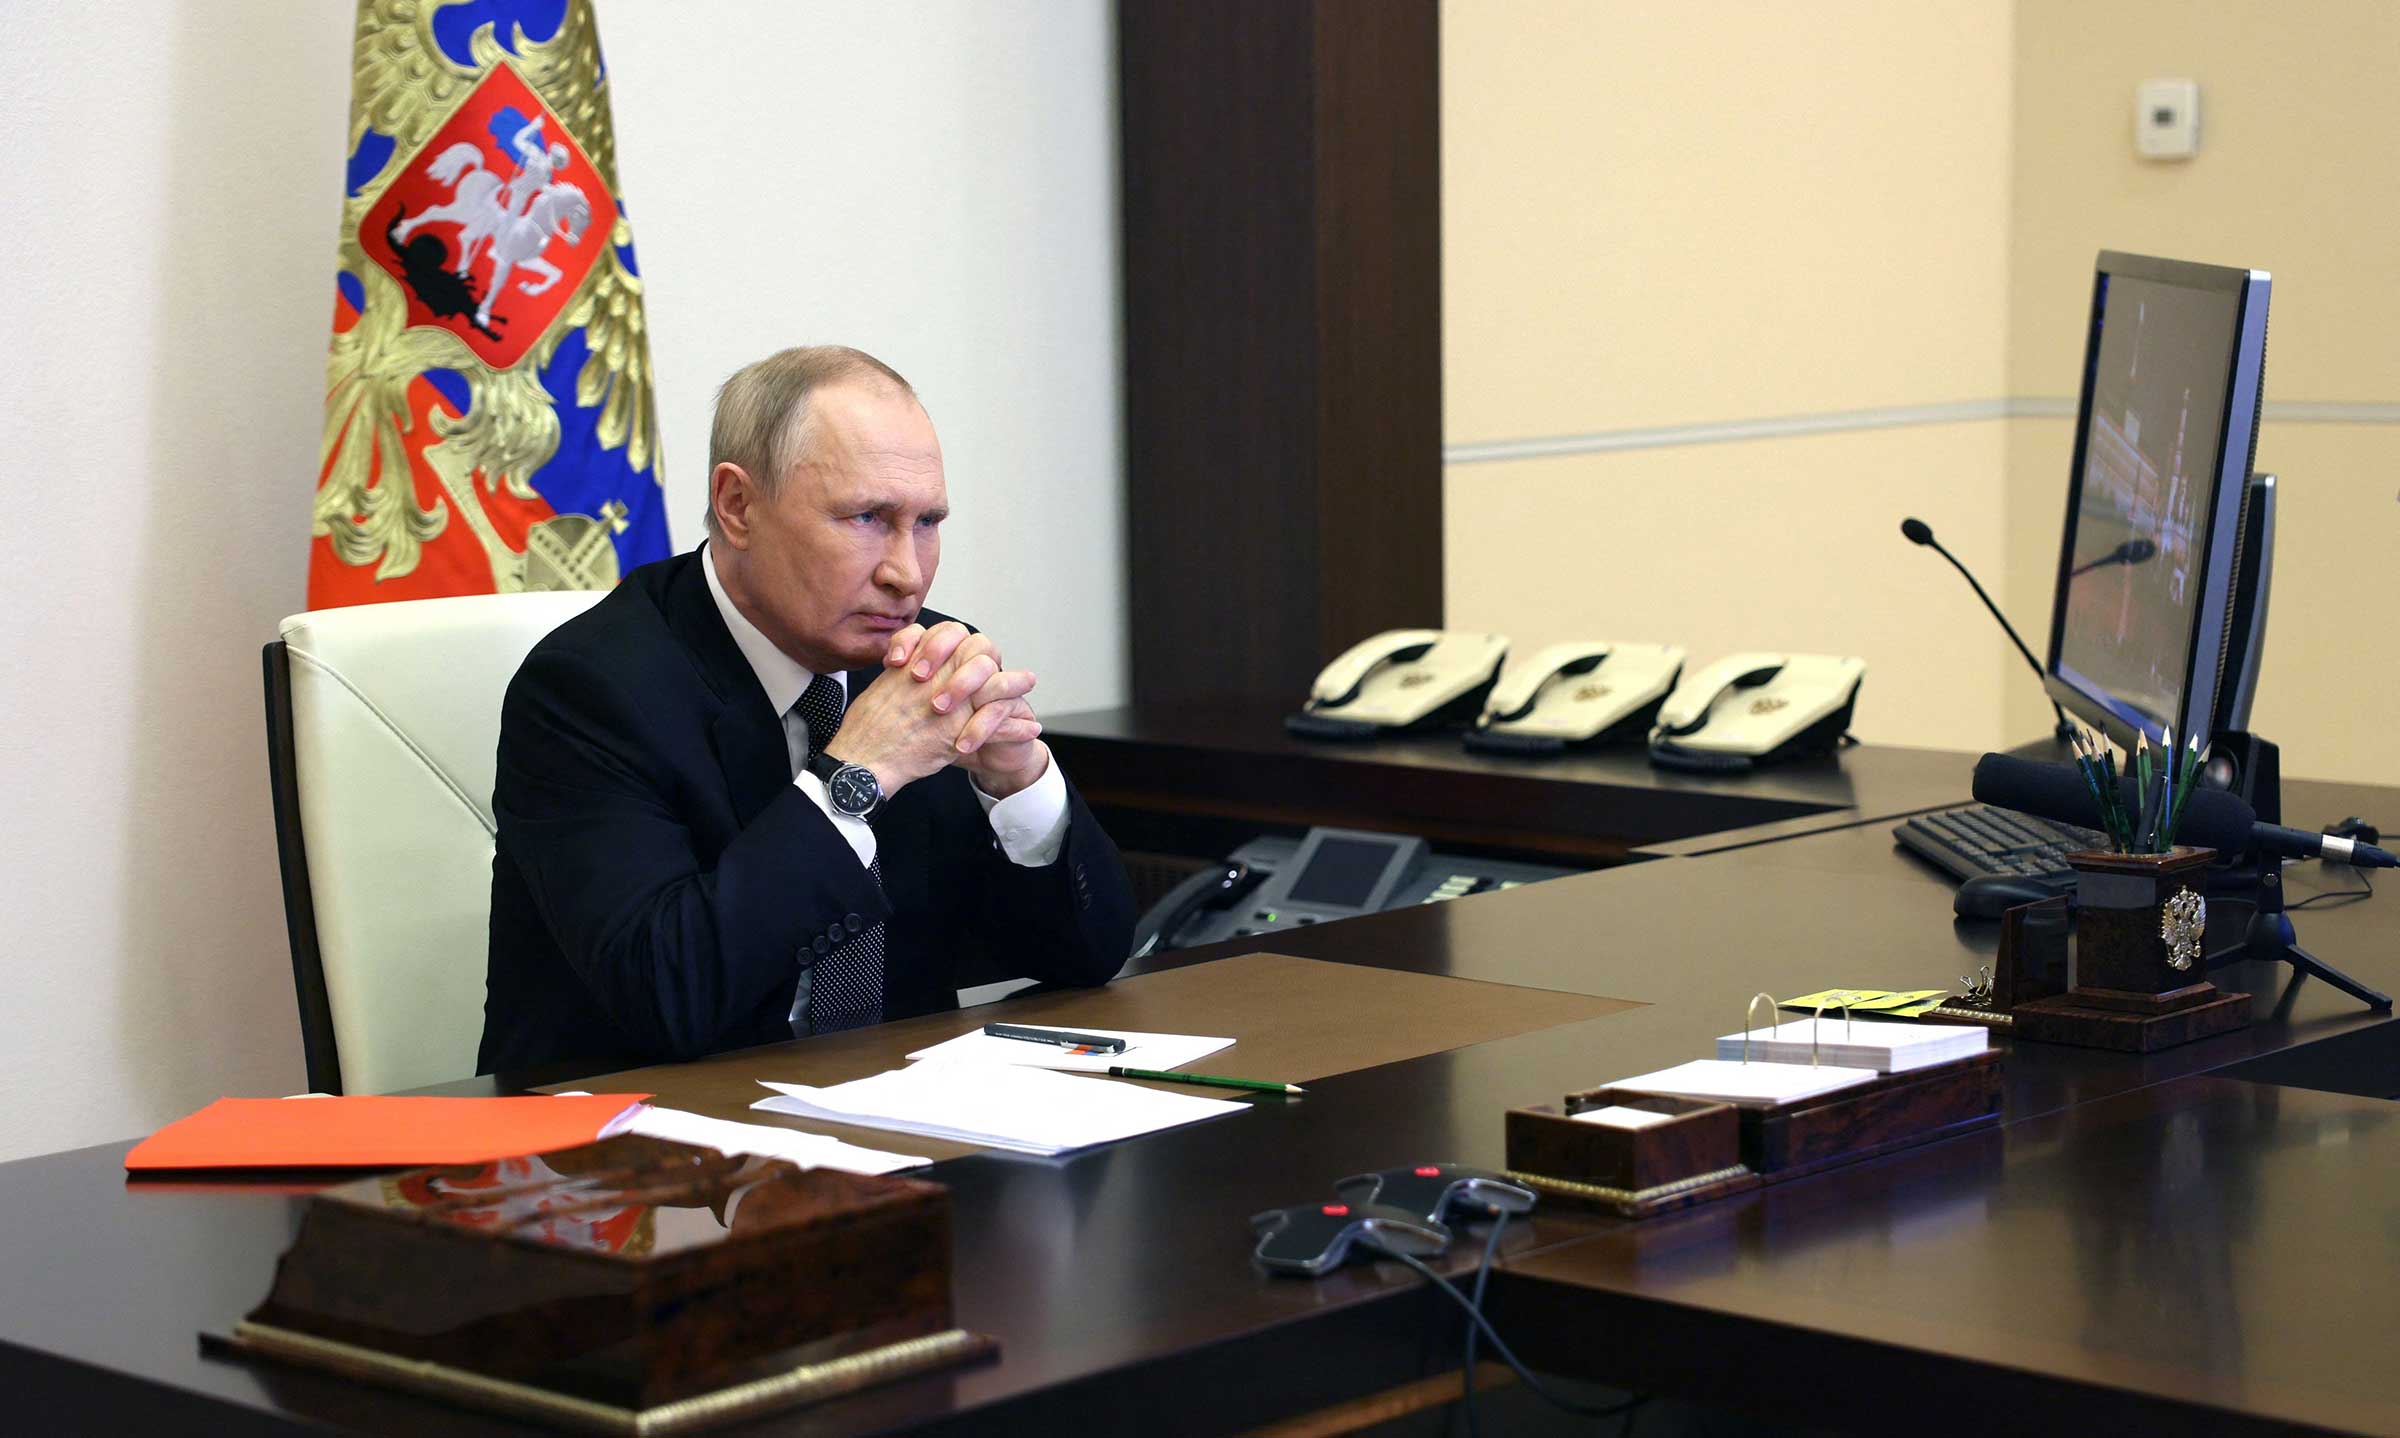 Russian President Vladimir Putin chairs a Security Council meeting via a video link at the Novo-Ogaryovo state residence outside Moscow on October 19, 2022. (Sergei Ilyin—Sputnik/AFP/Getty Images)